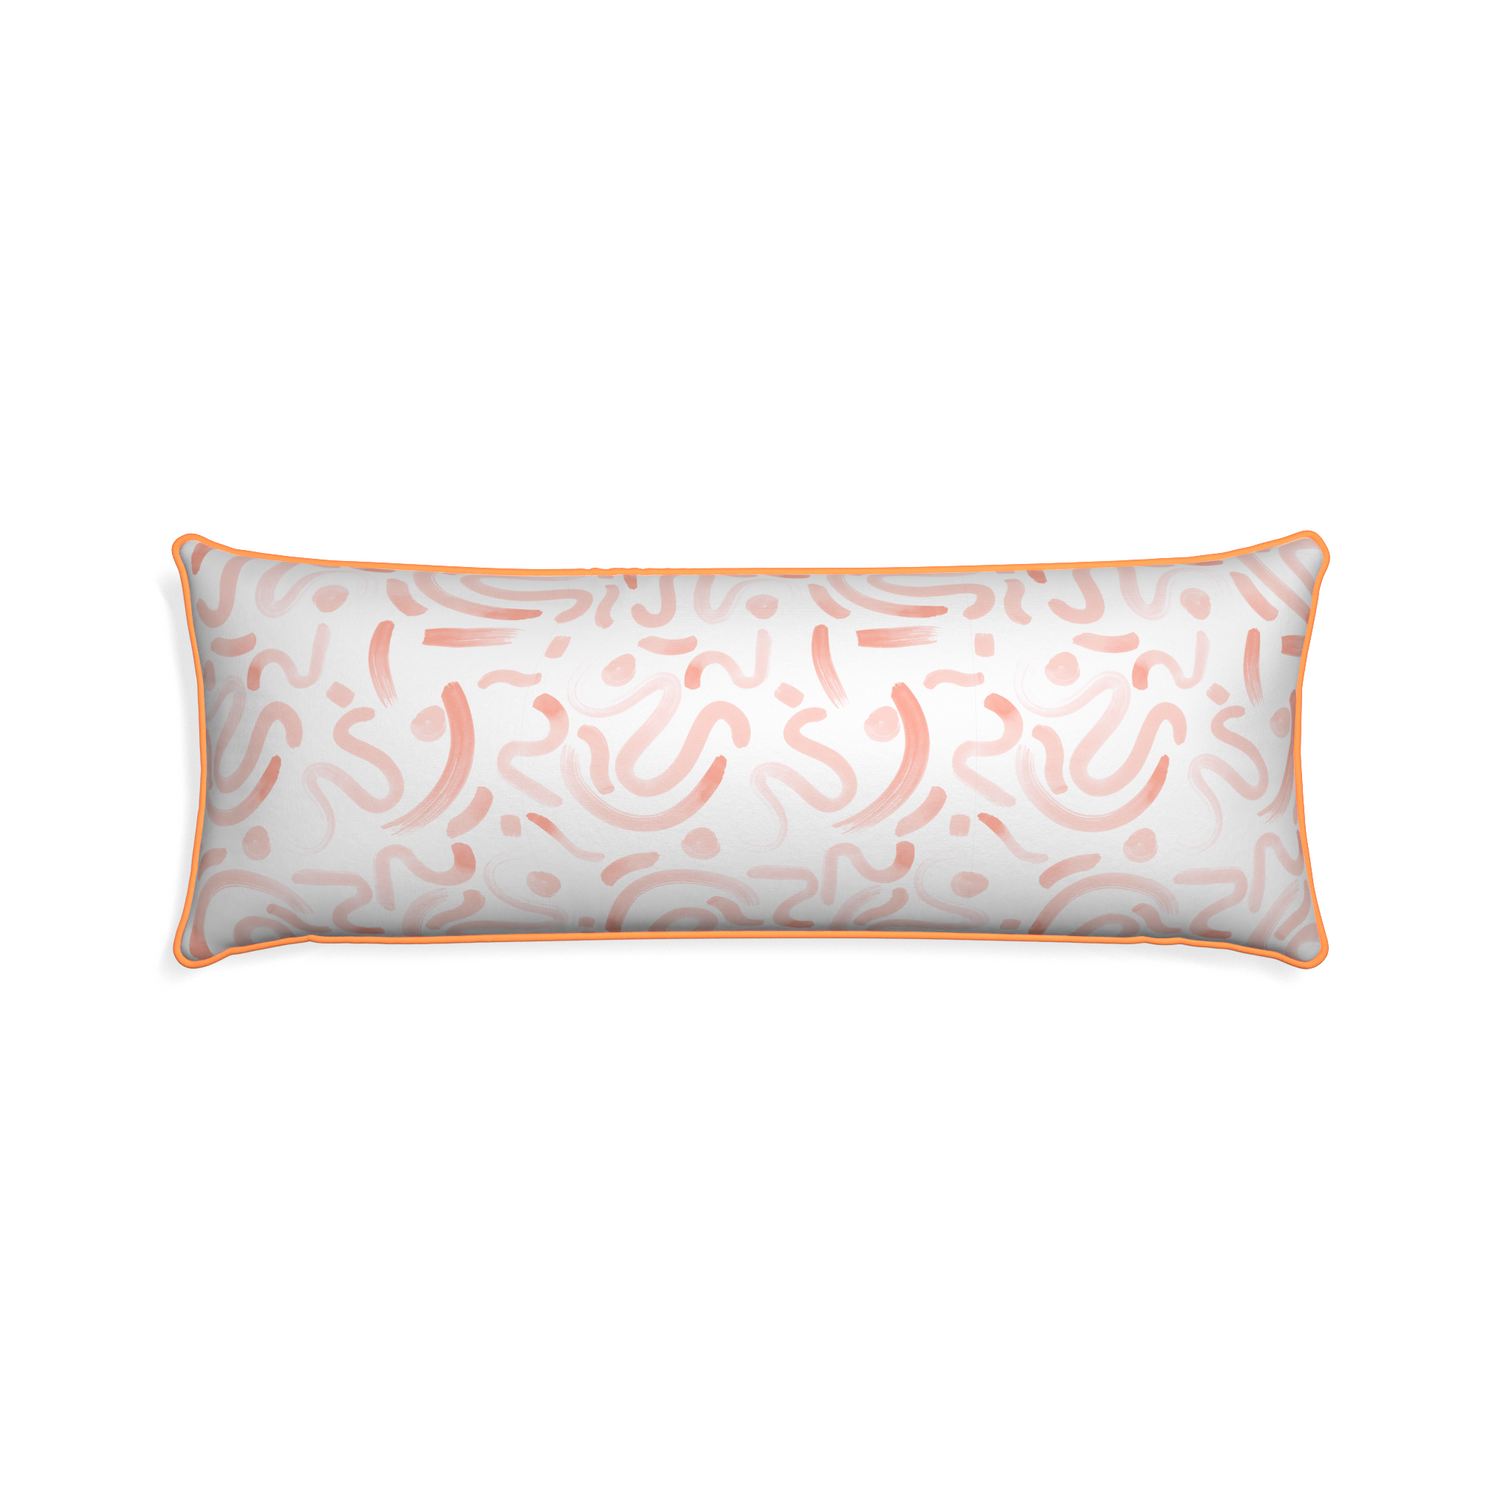 Xl-lumbar hockney pink custom pillow with clementine piping on white background